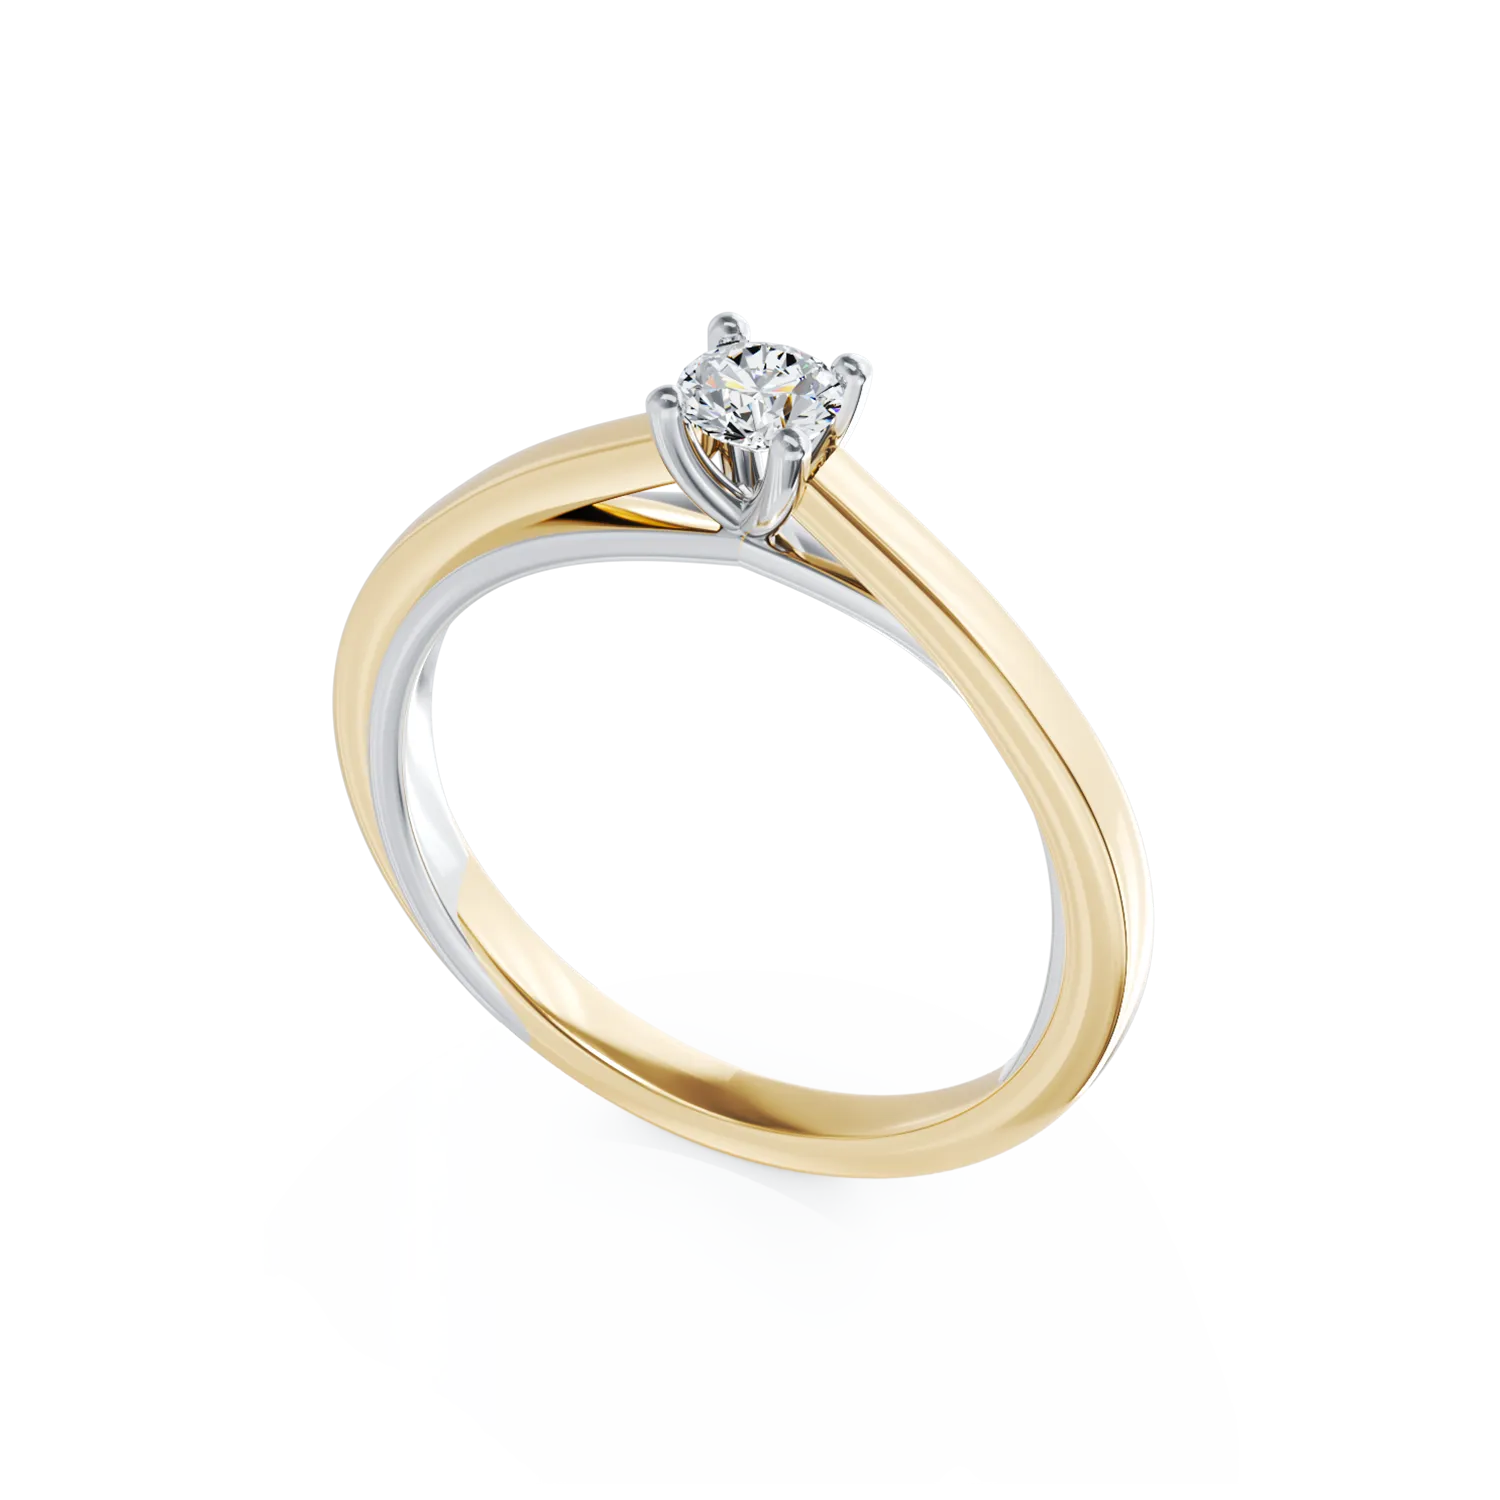 18K white-yellow gold engagement ring with 0.19ct diamond